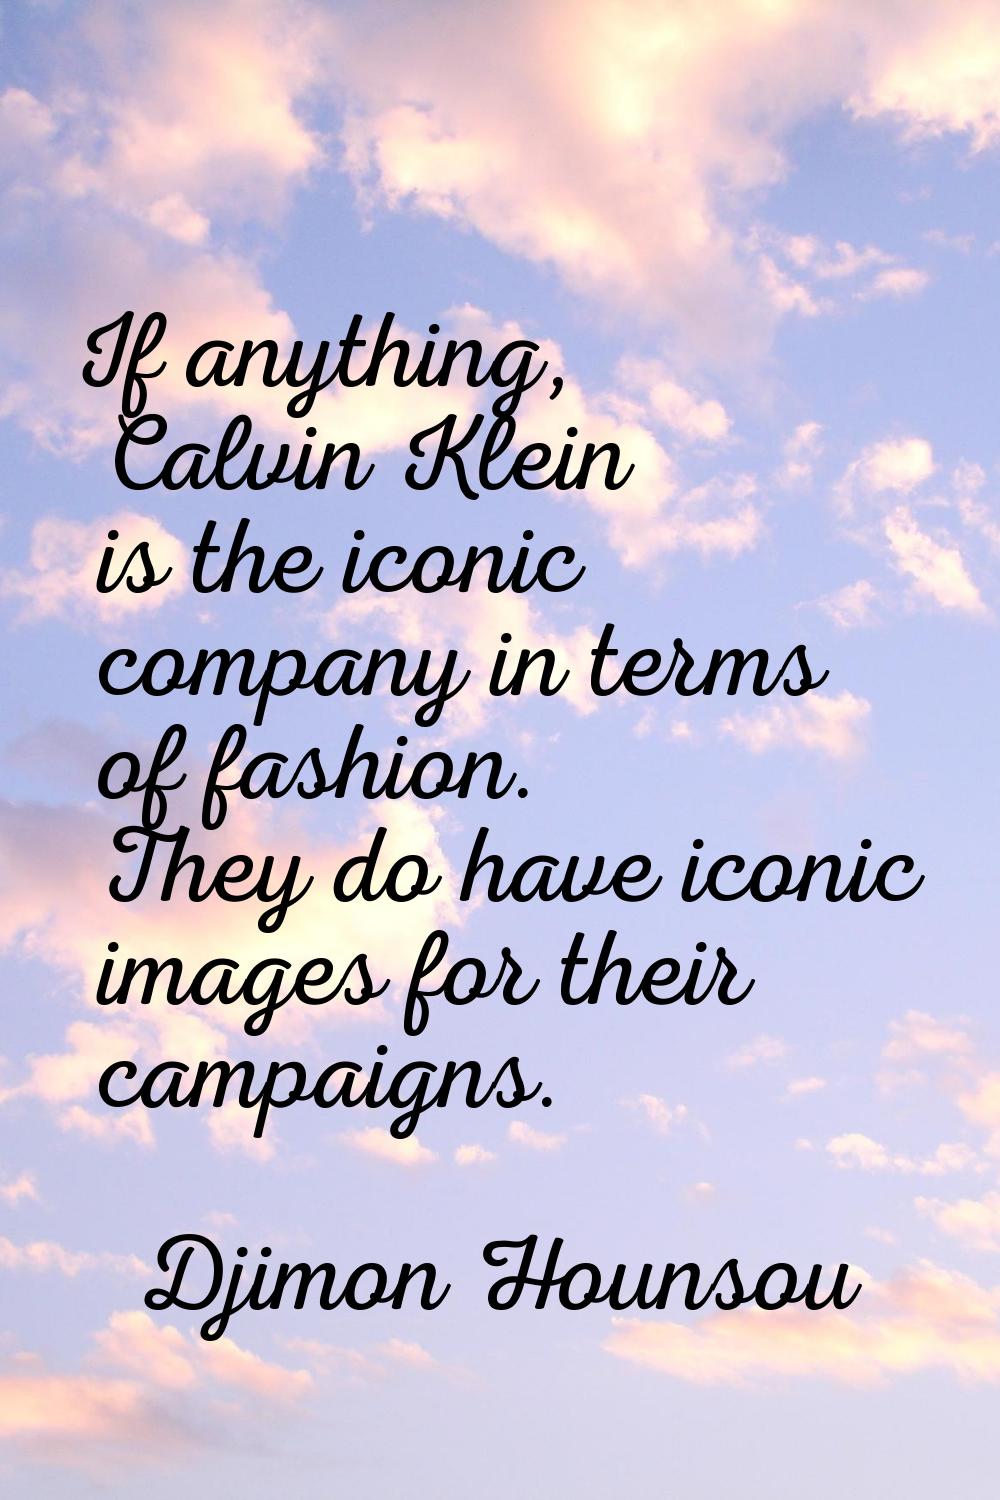 If anything, Calvin Klein is the iconic company in terms of fashion. They do have iconic images for